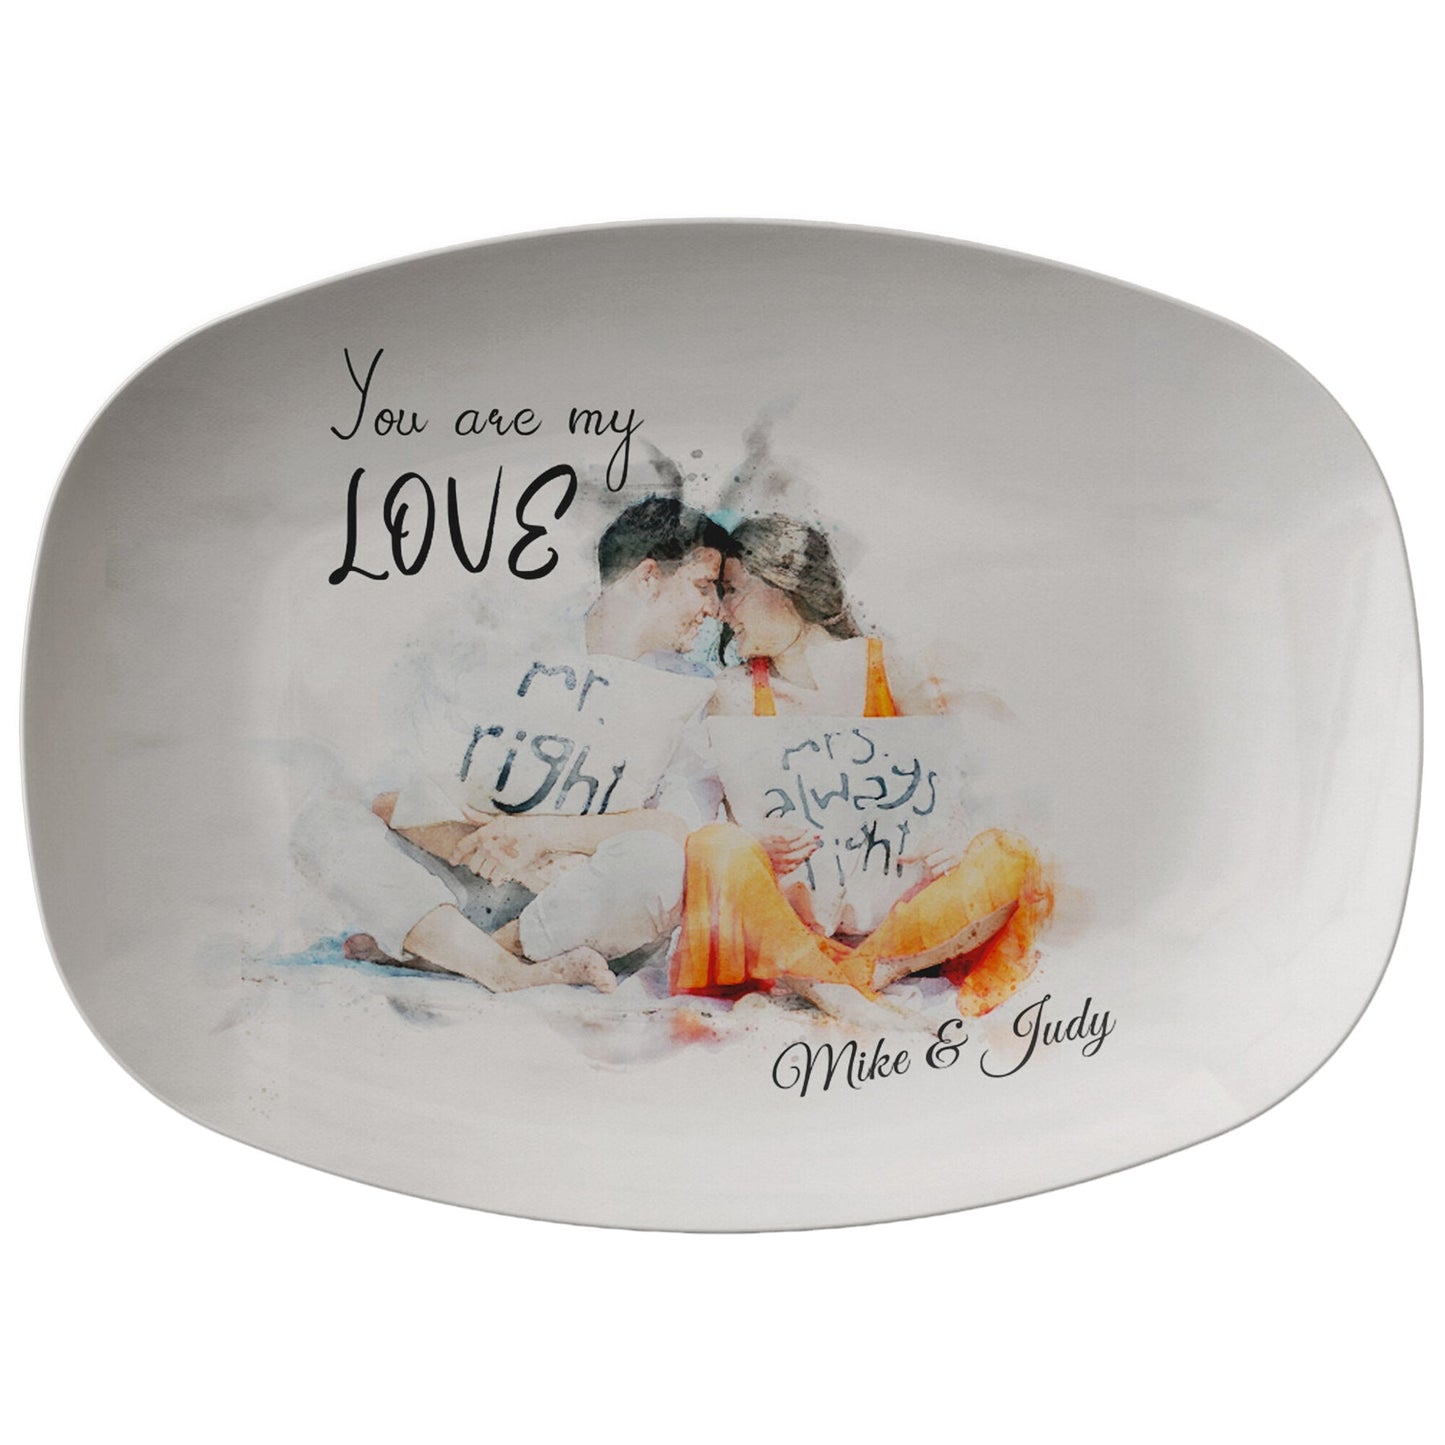 Personalized Serving Platter With Your Photo